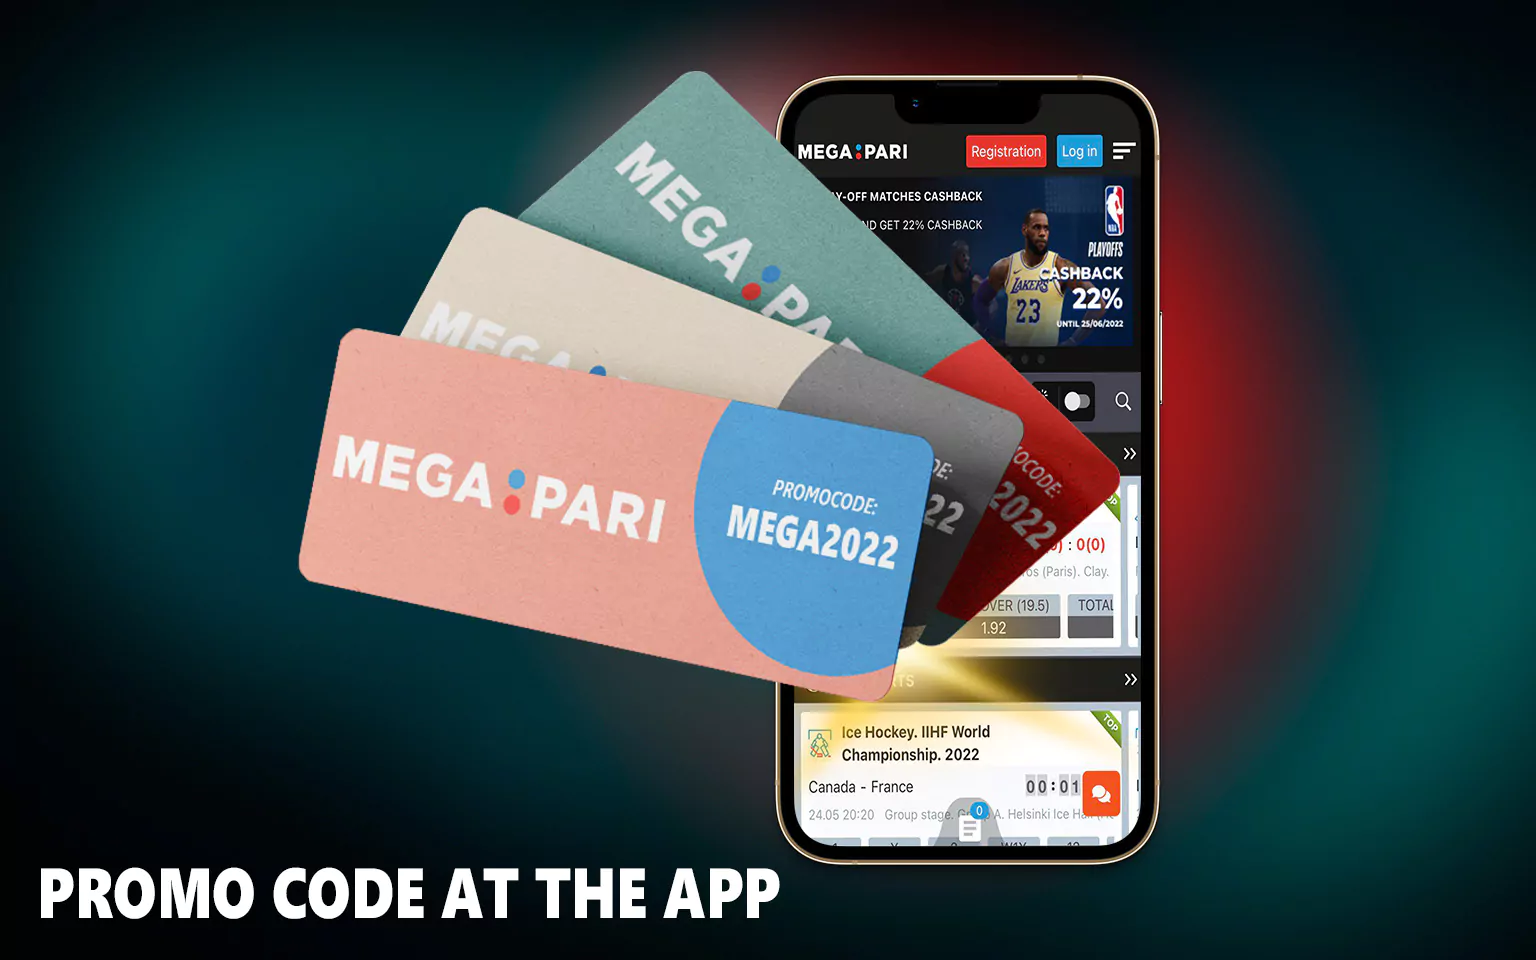 Enter the code MEGA2022 when registering in the application to get all the current Megpari bonuses.